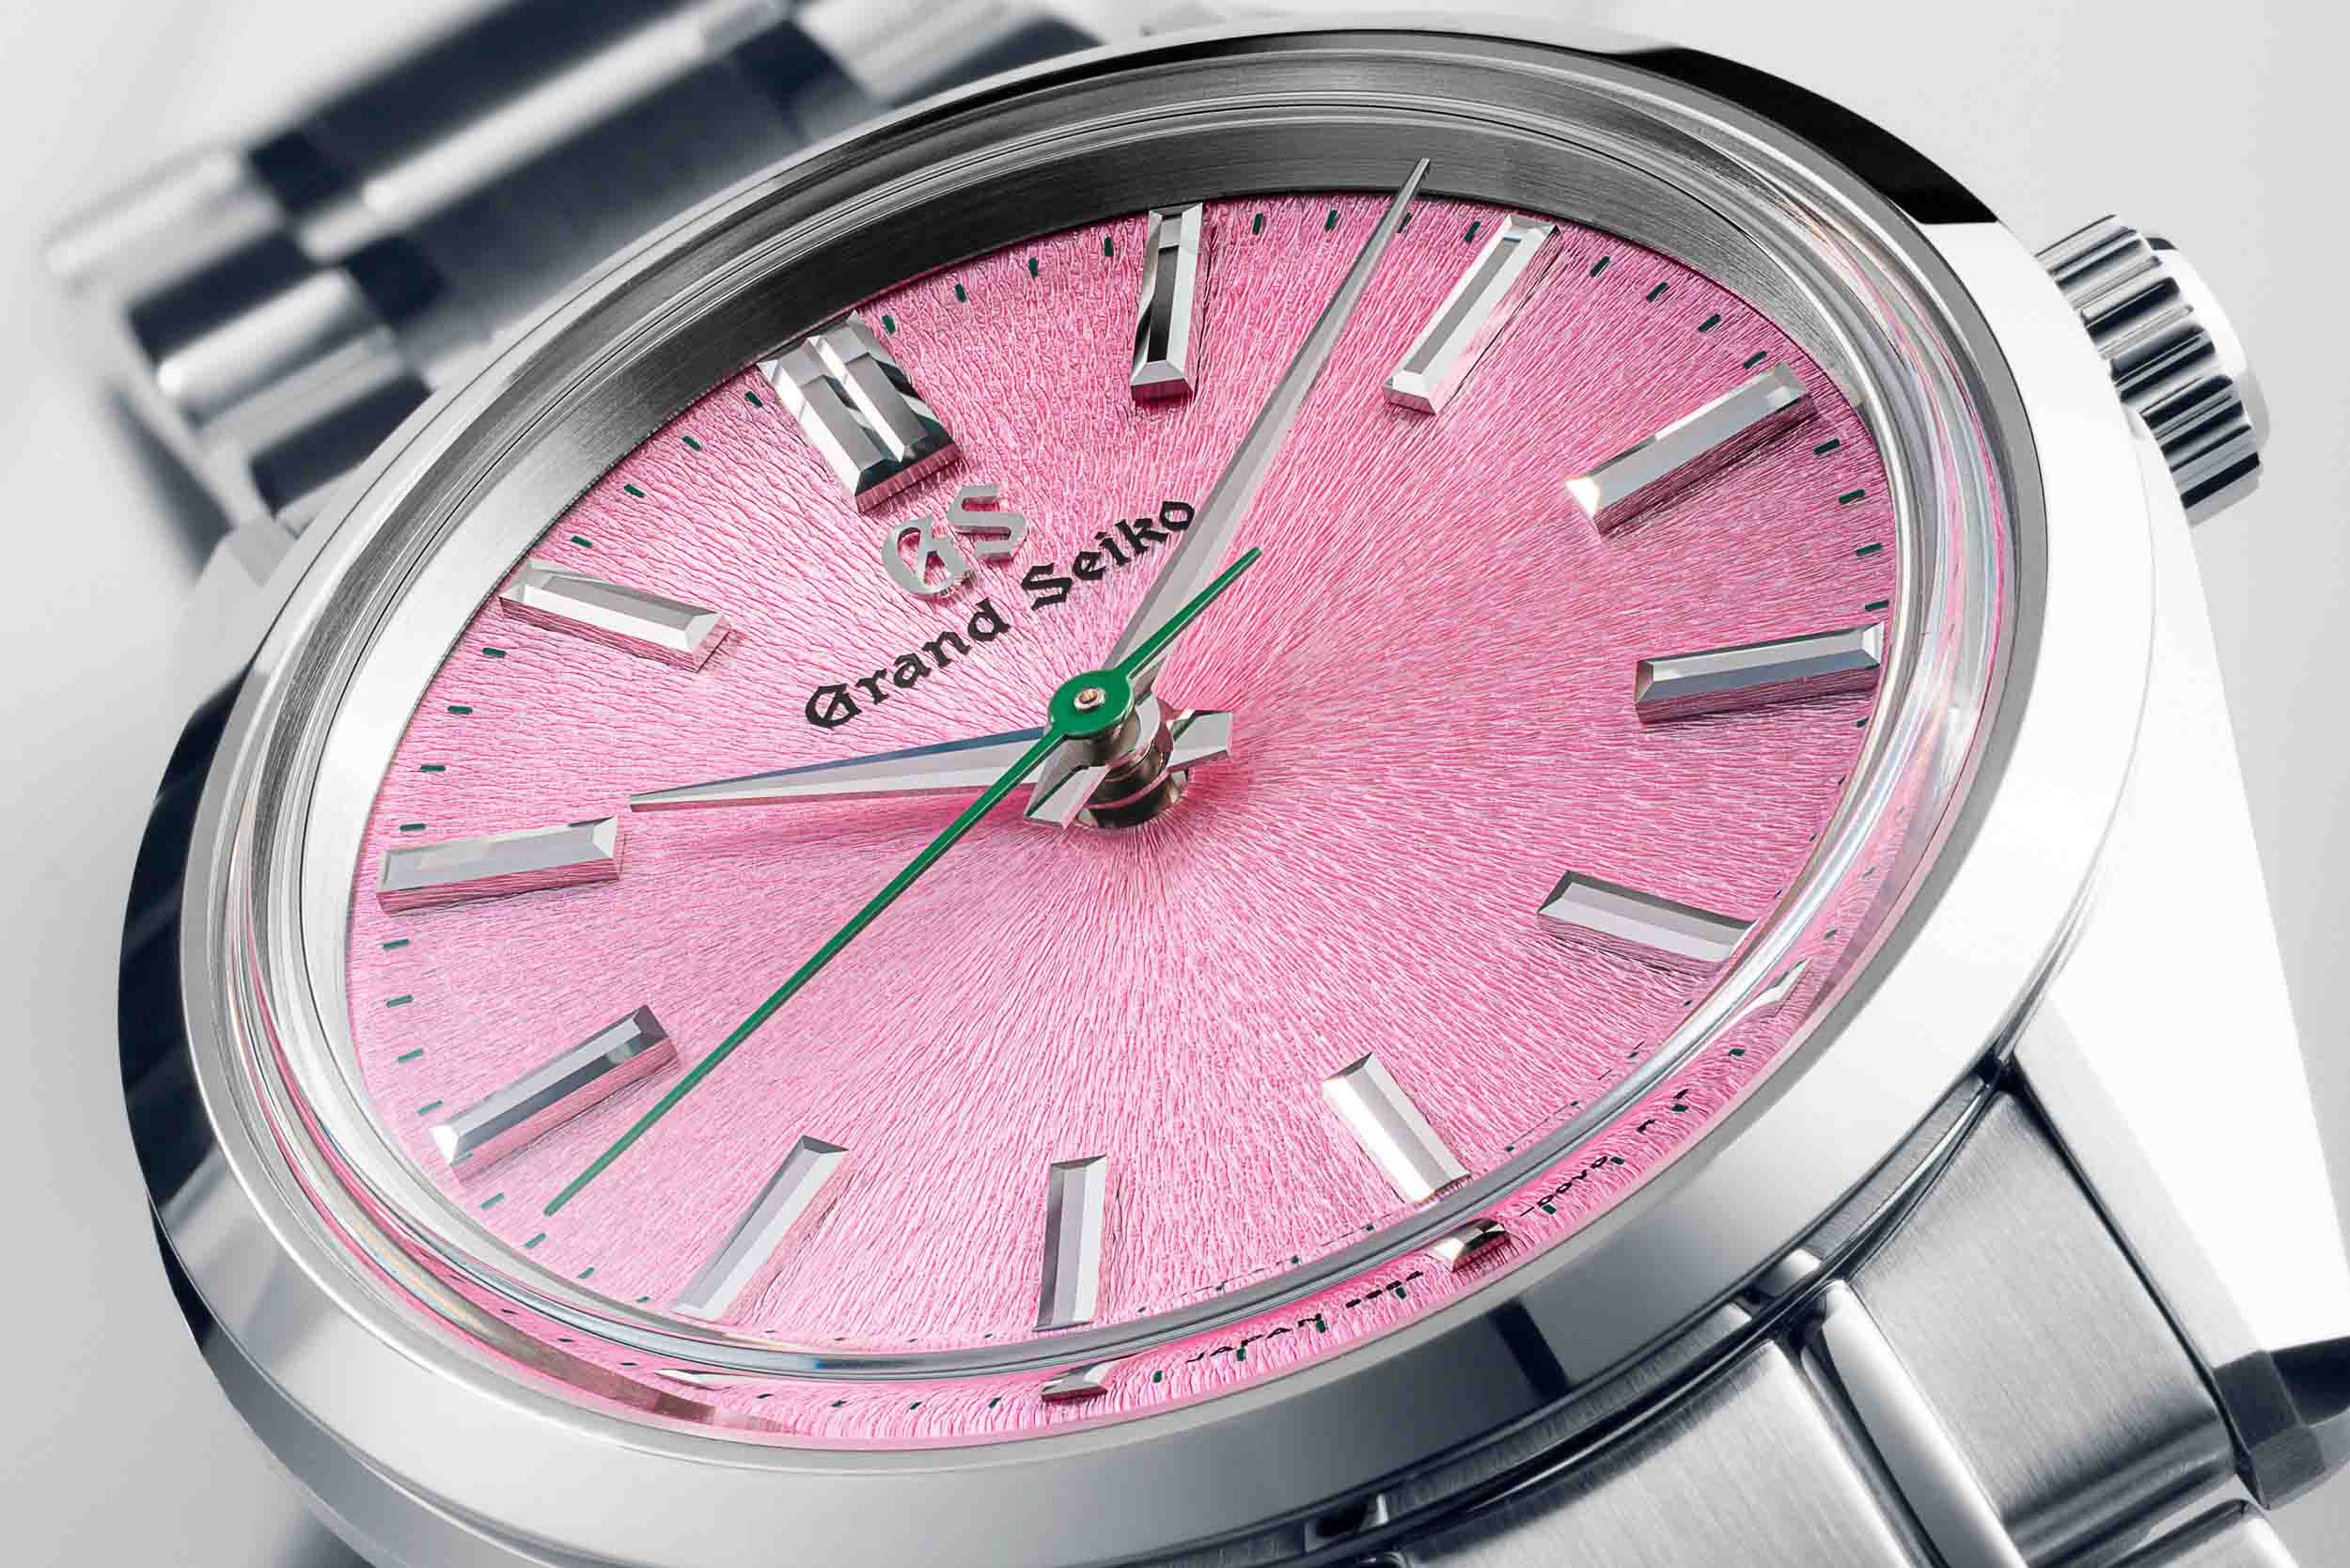 Grand Seiko US Exclusive SBGW313 pink Mt. Iwate dial watch.